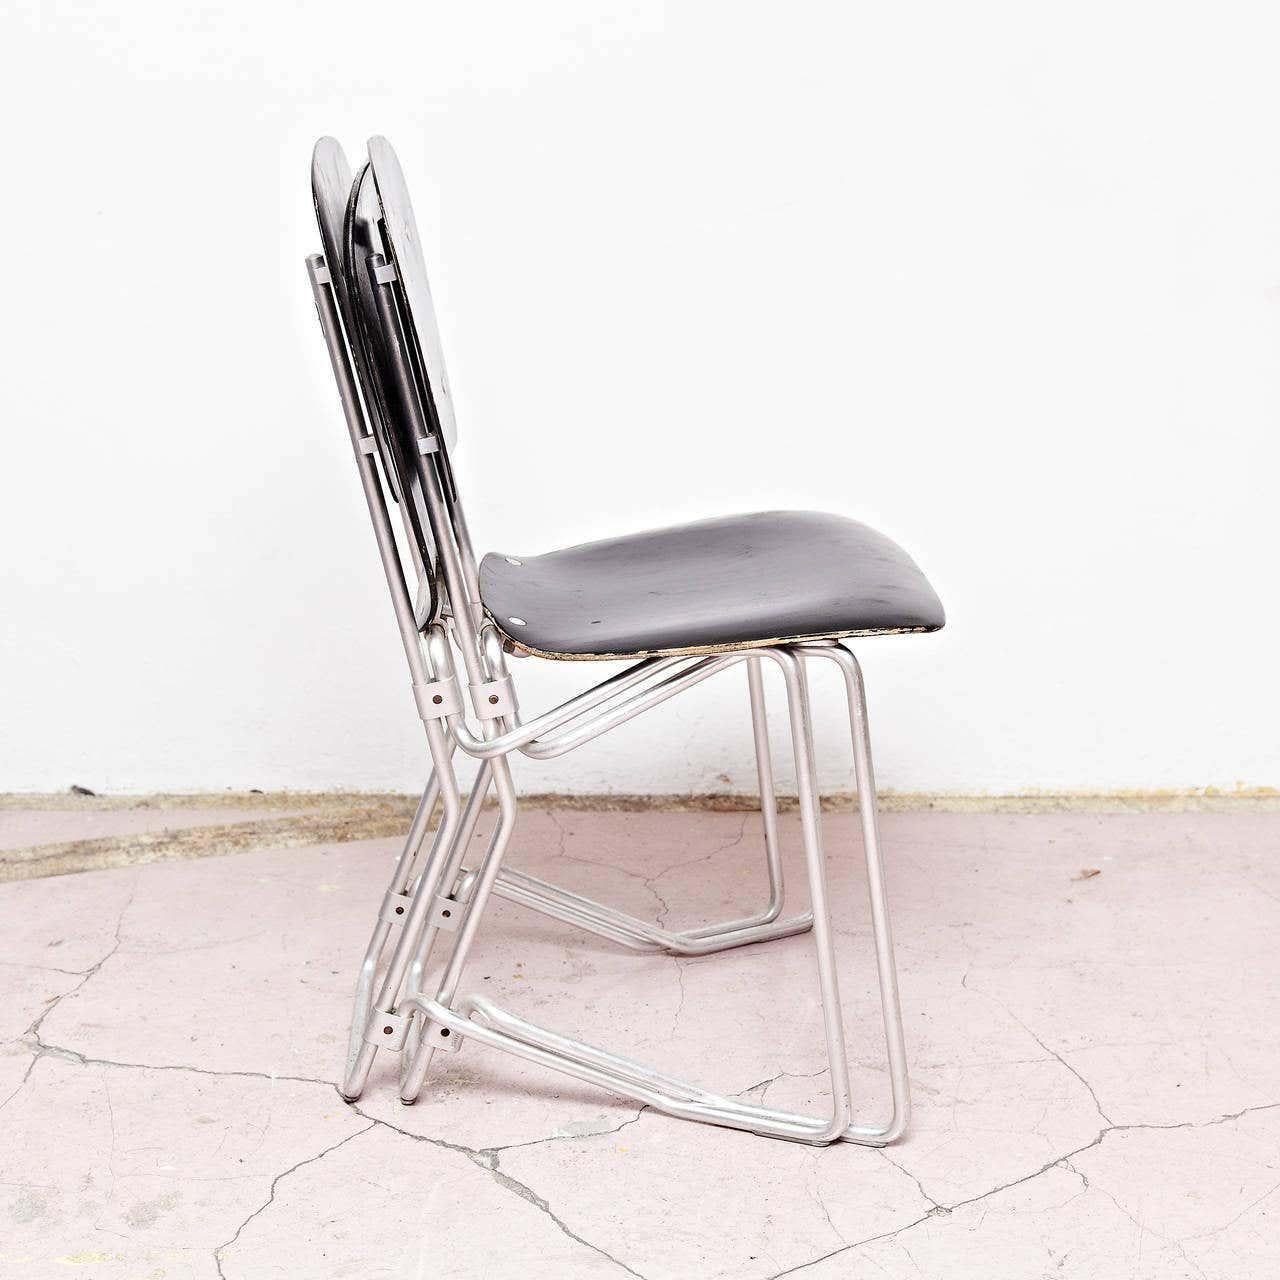 Stackable Aluflex chairs designed by Armin Wirth
Manufactured by Aluflex, Switzerland, circa 1950. 

In good original condition, with minor wear consistent with age and use, preserving a beautiful patina.

2 Chairs available.